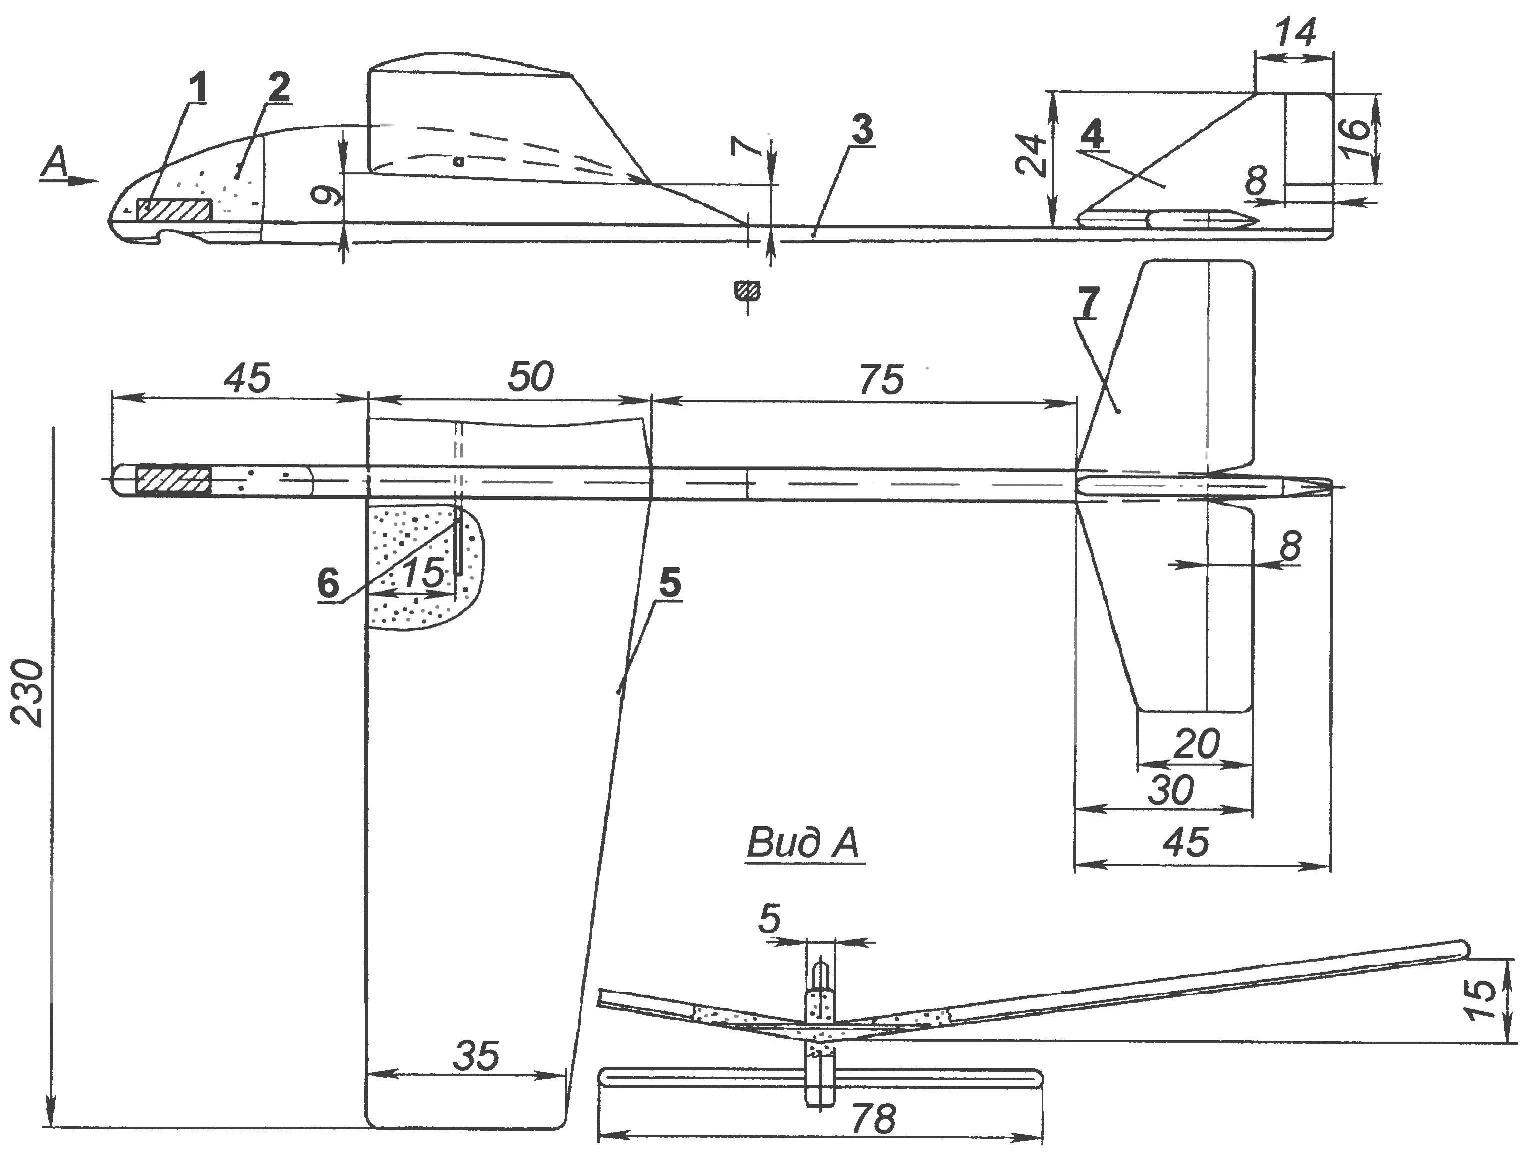 Fig. 2. Model glider to start with the hands and using a catapult